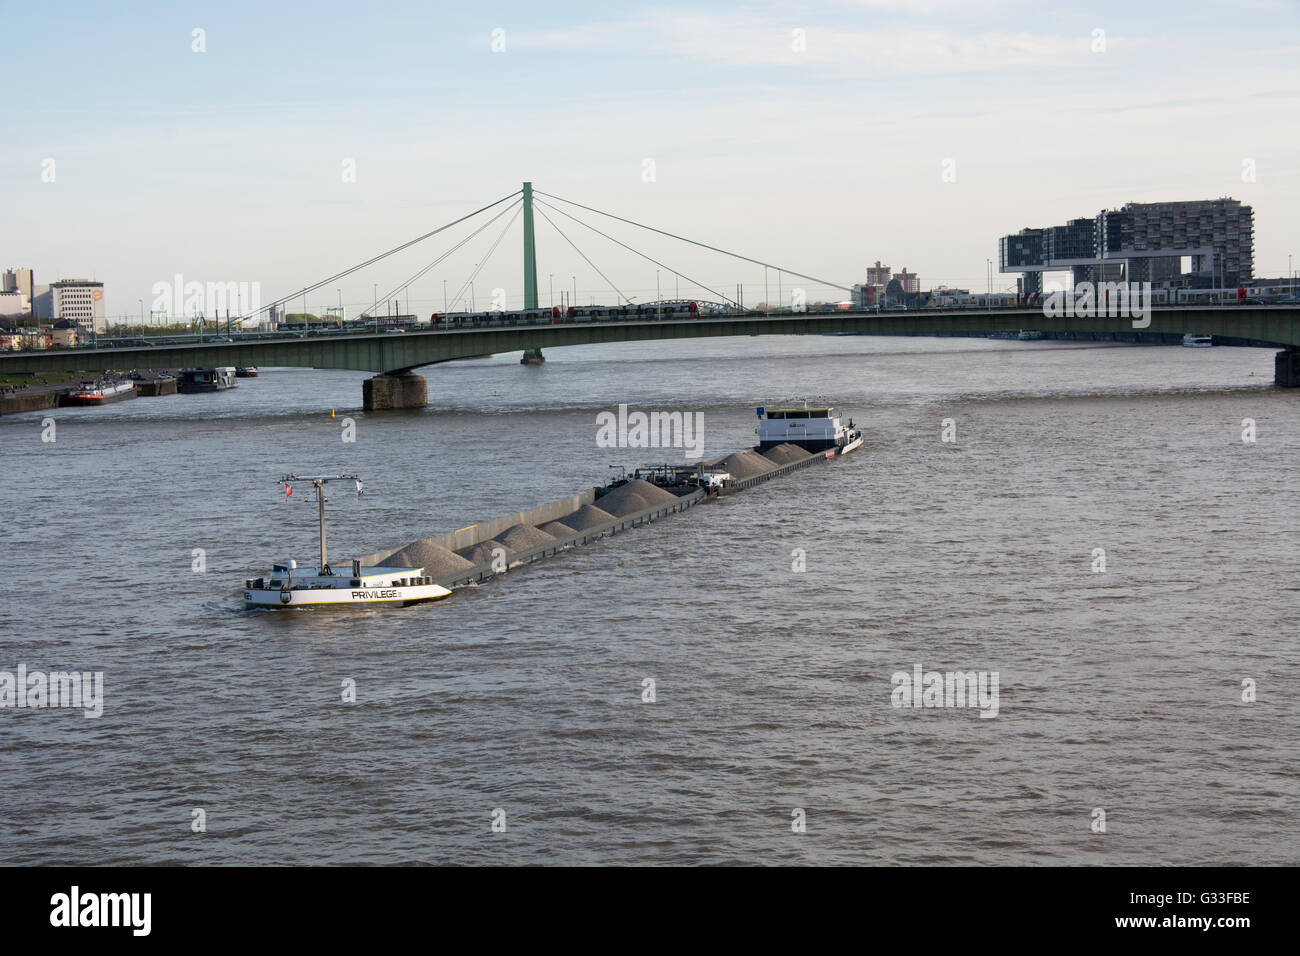 The motor barge Privilage II passes through Köln (Cologne) as it travels along the River Rhine Stock Photo